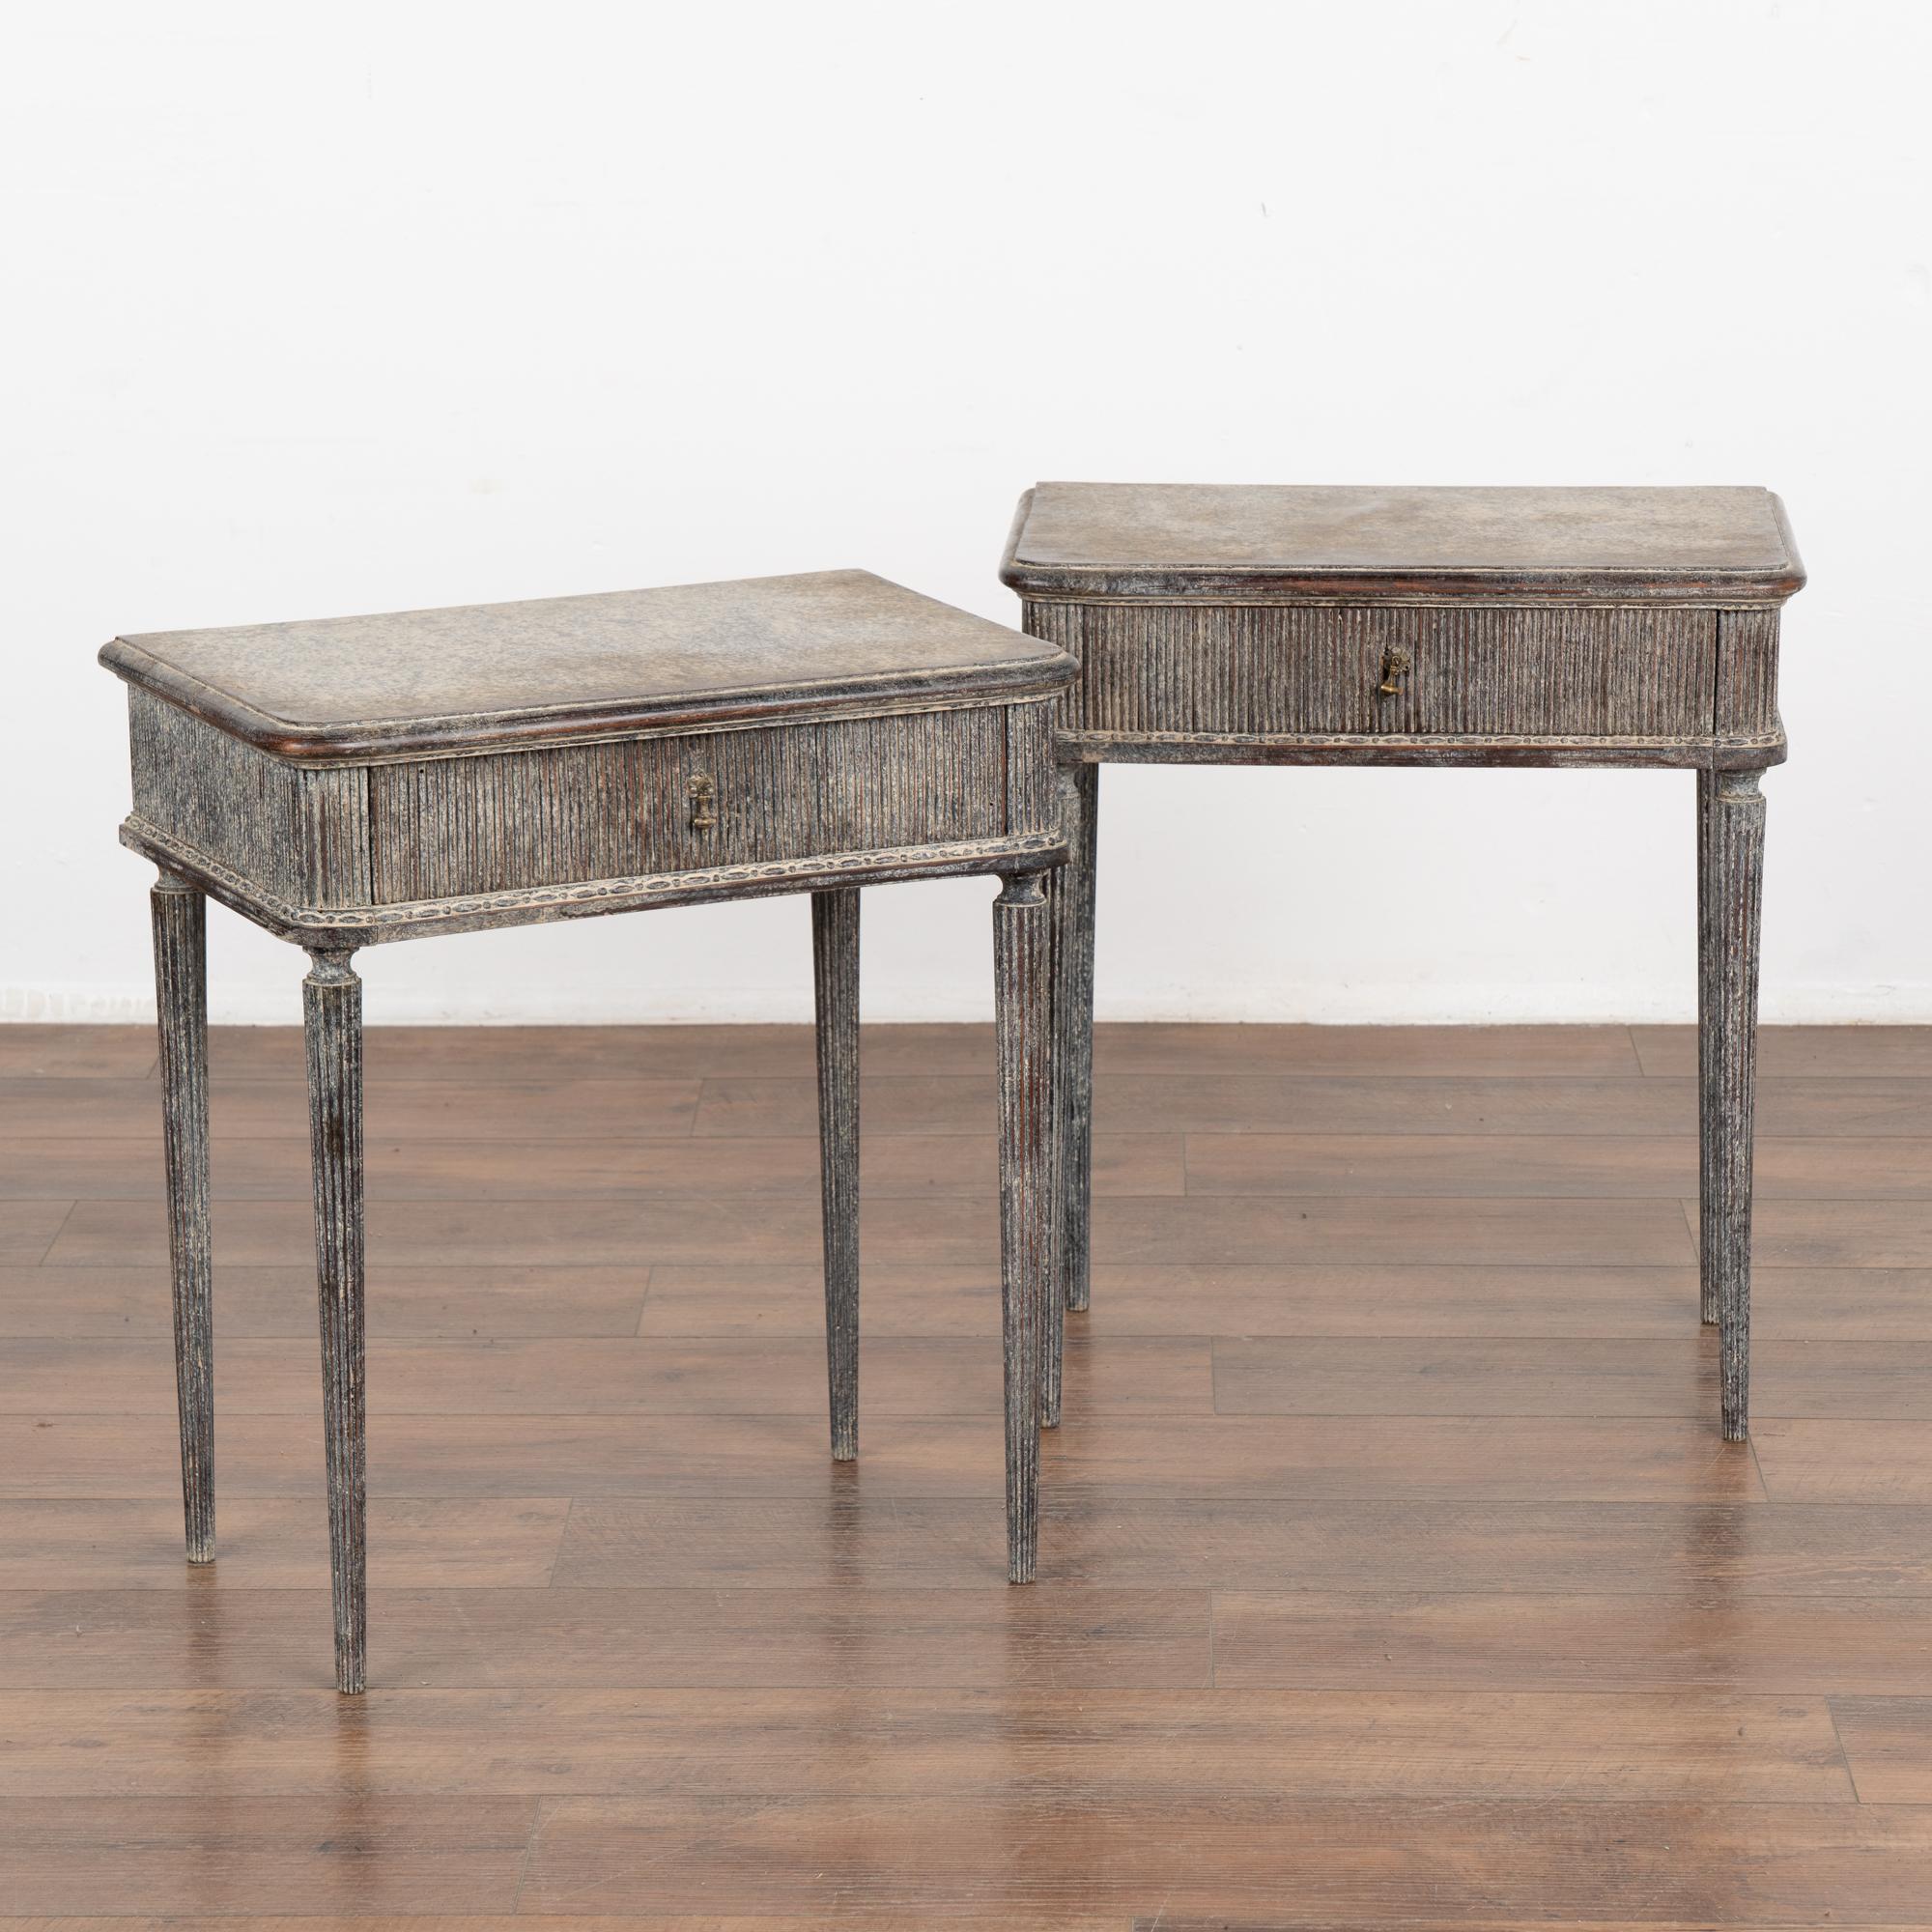 Pair, Swedish Gustavian style side tables with fluted skirt and single drawer resting on graceful fluted turned legs.
Restored, later professionally painted in layered/mottled shades of gray with plum undertones and white overtones all lightly